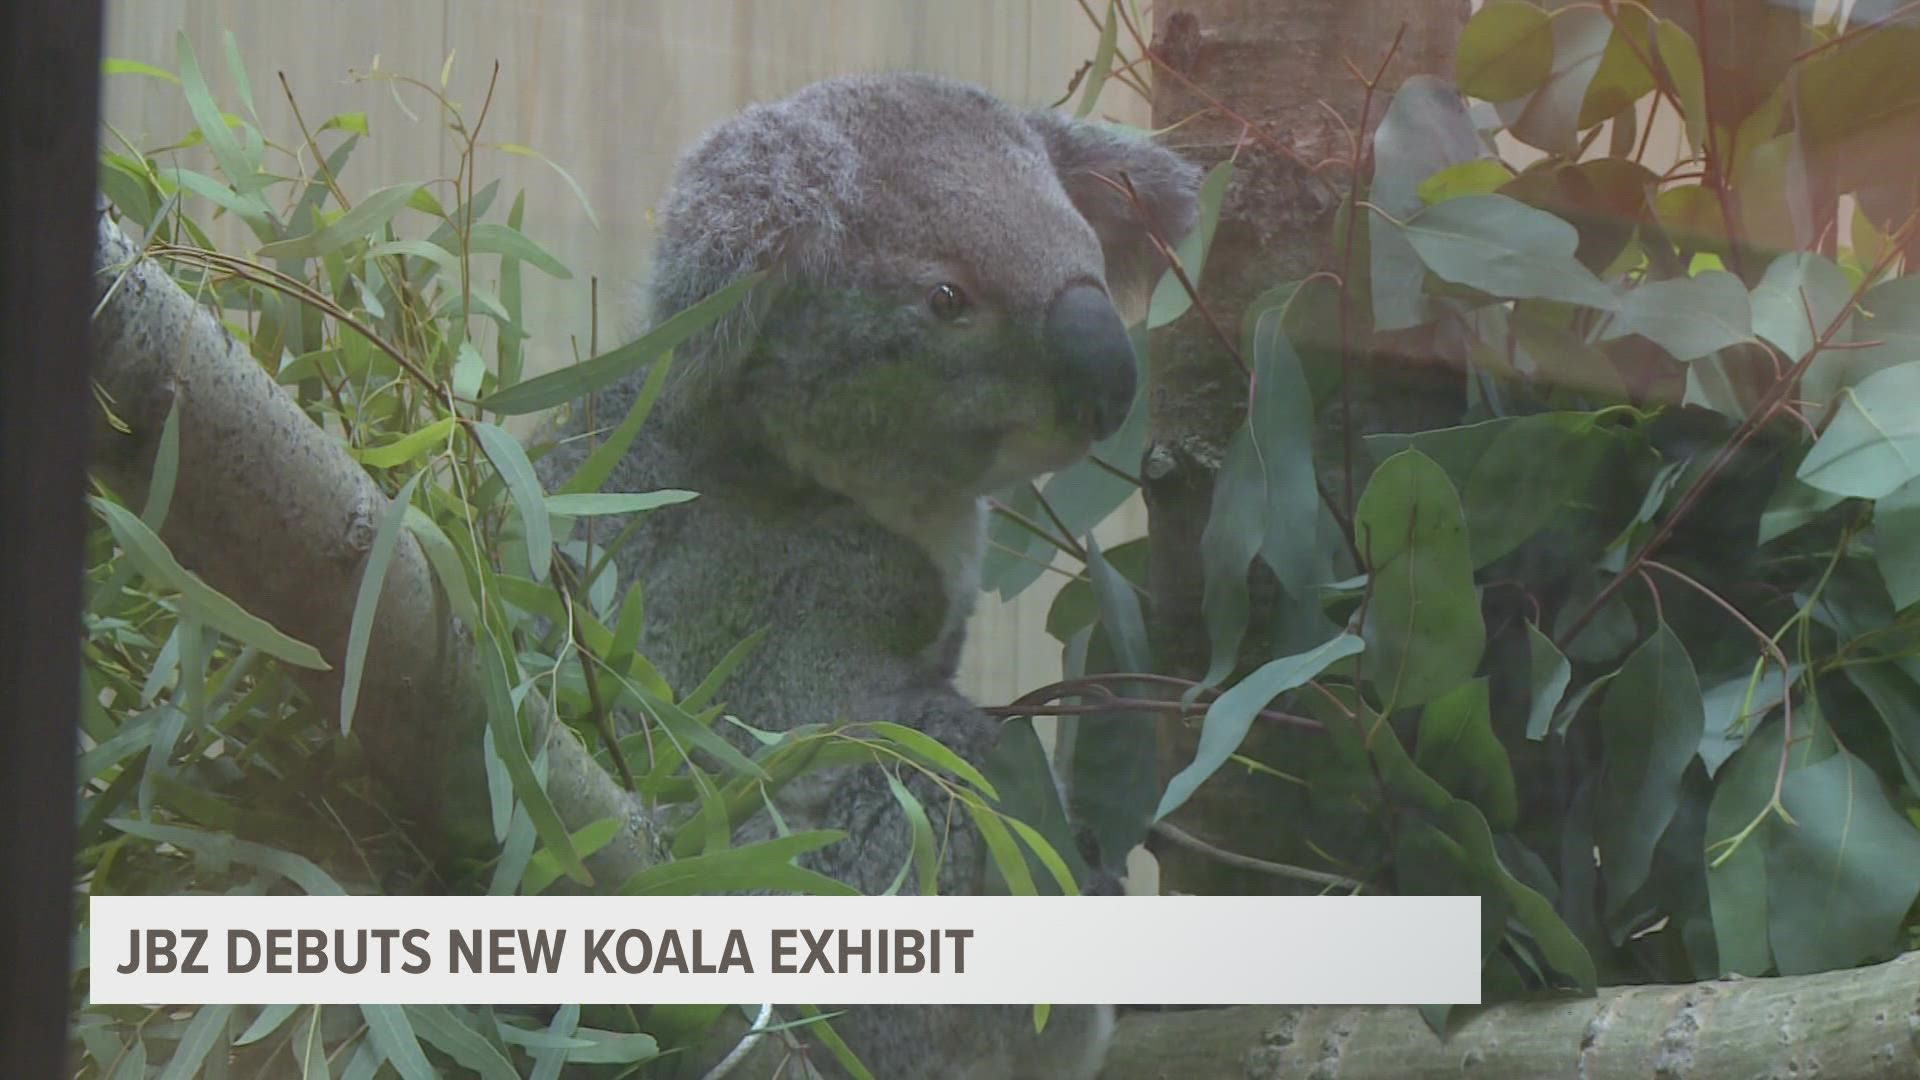 Named Iluka and Noorundi, the koalas are visiting John Ball Zoo through a partnership with the San Diego Zoo Global Education and Conservation Project.